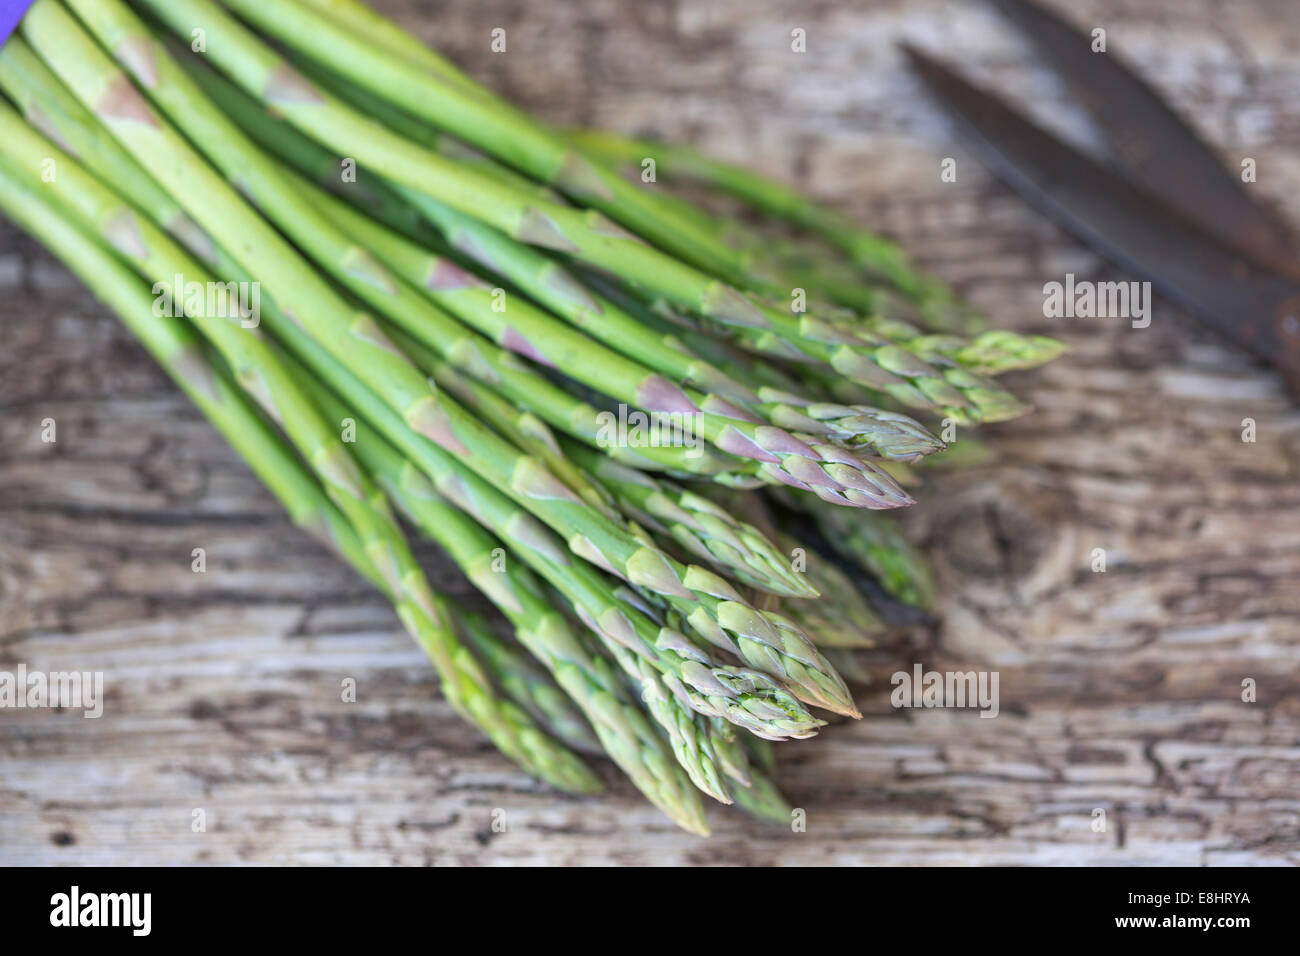 uncooked fine asparagus lying on rustic wood outdoors, with vintage scissors Stock Photo